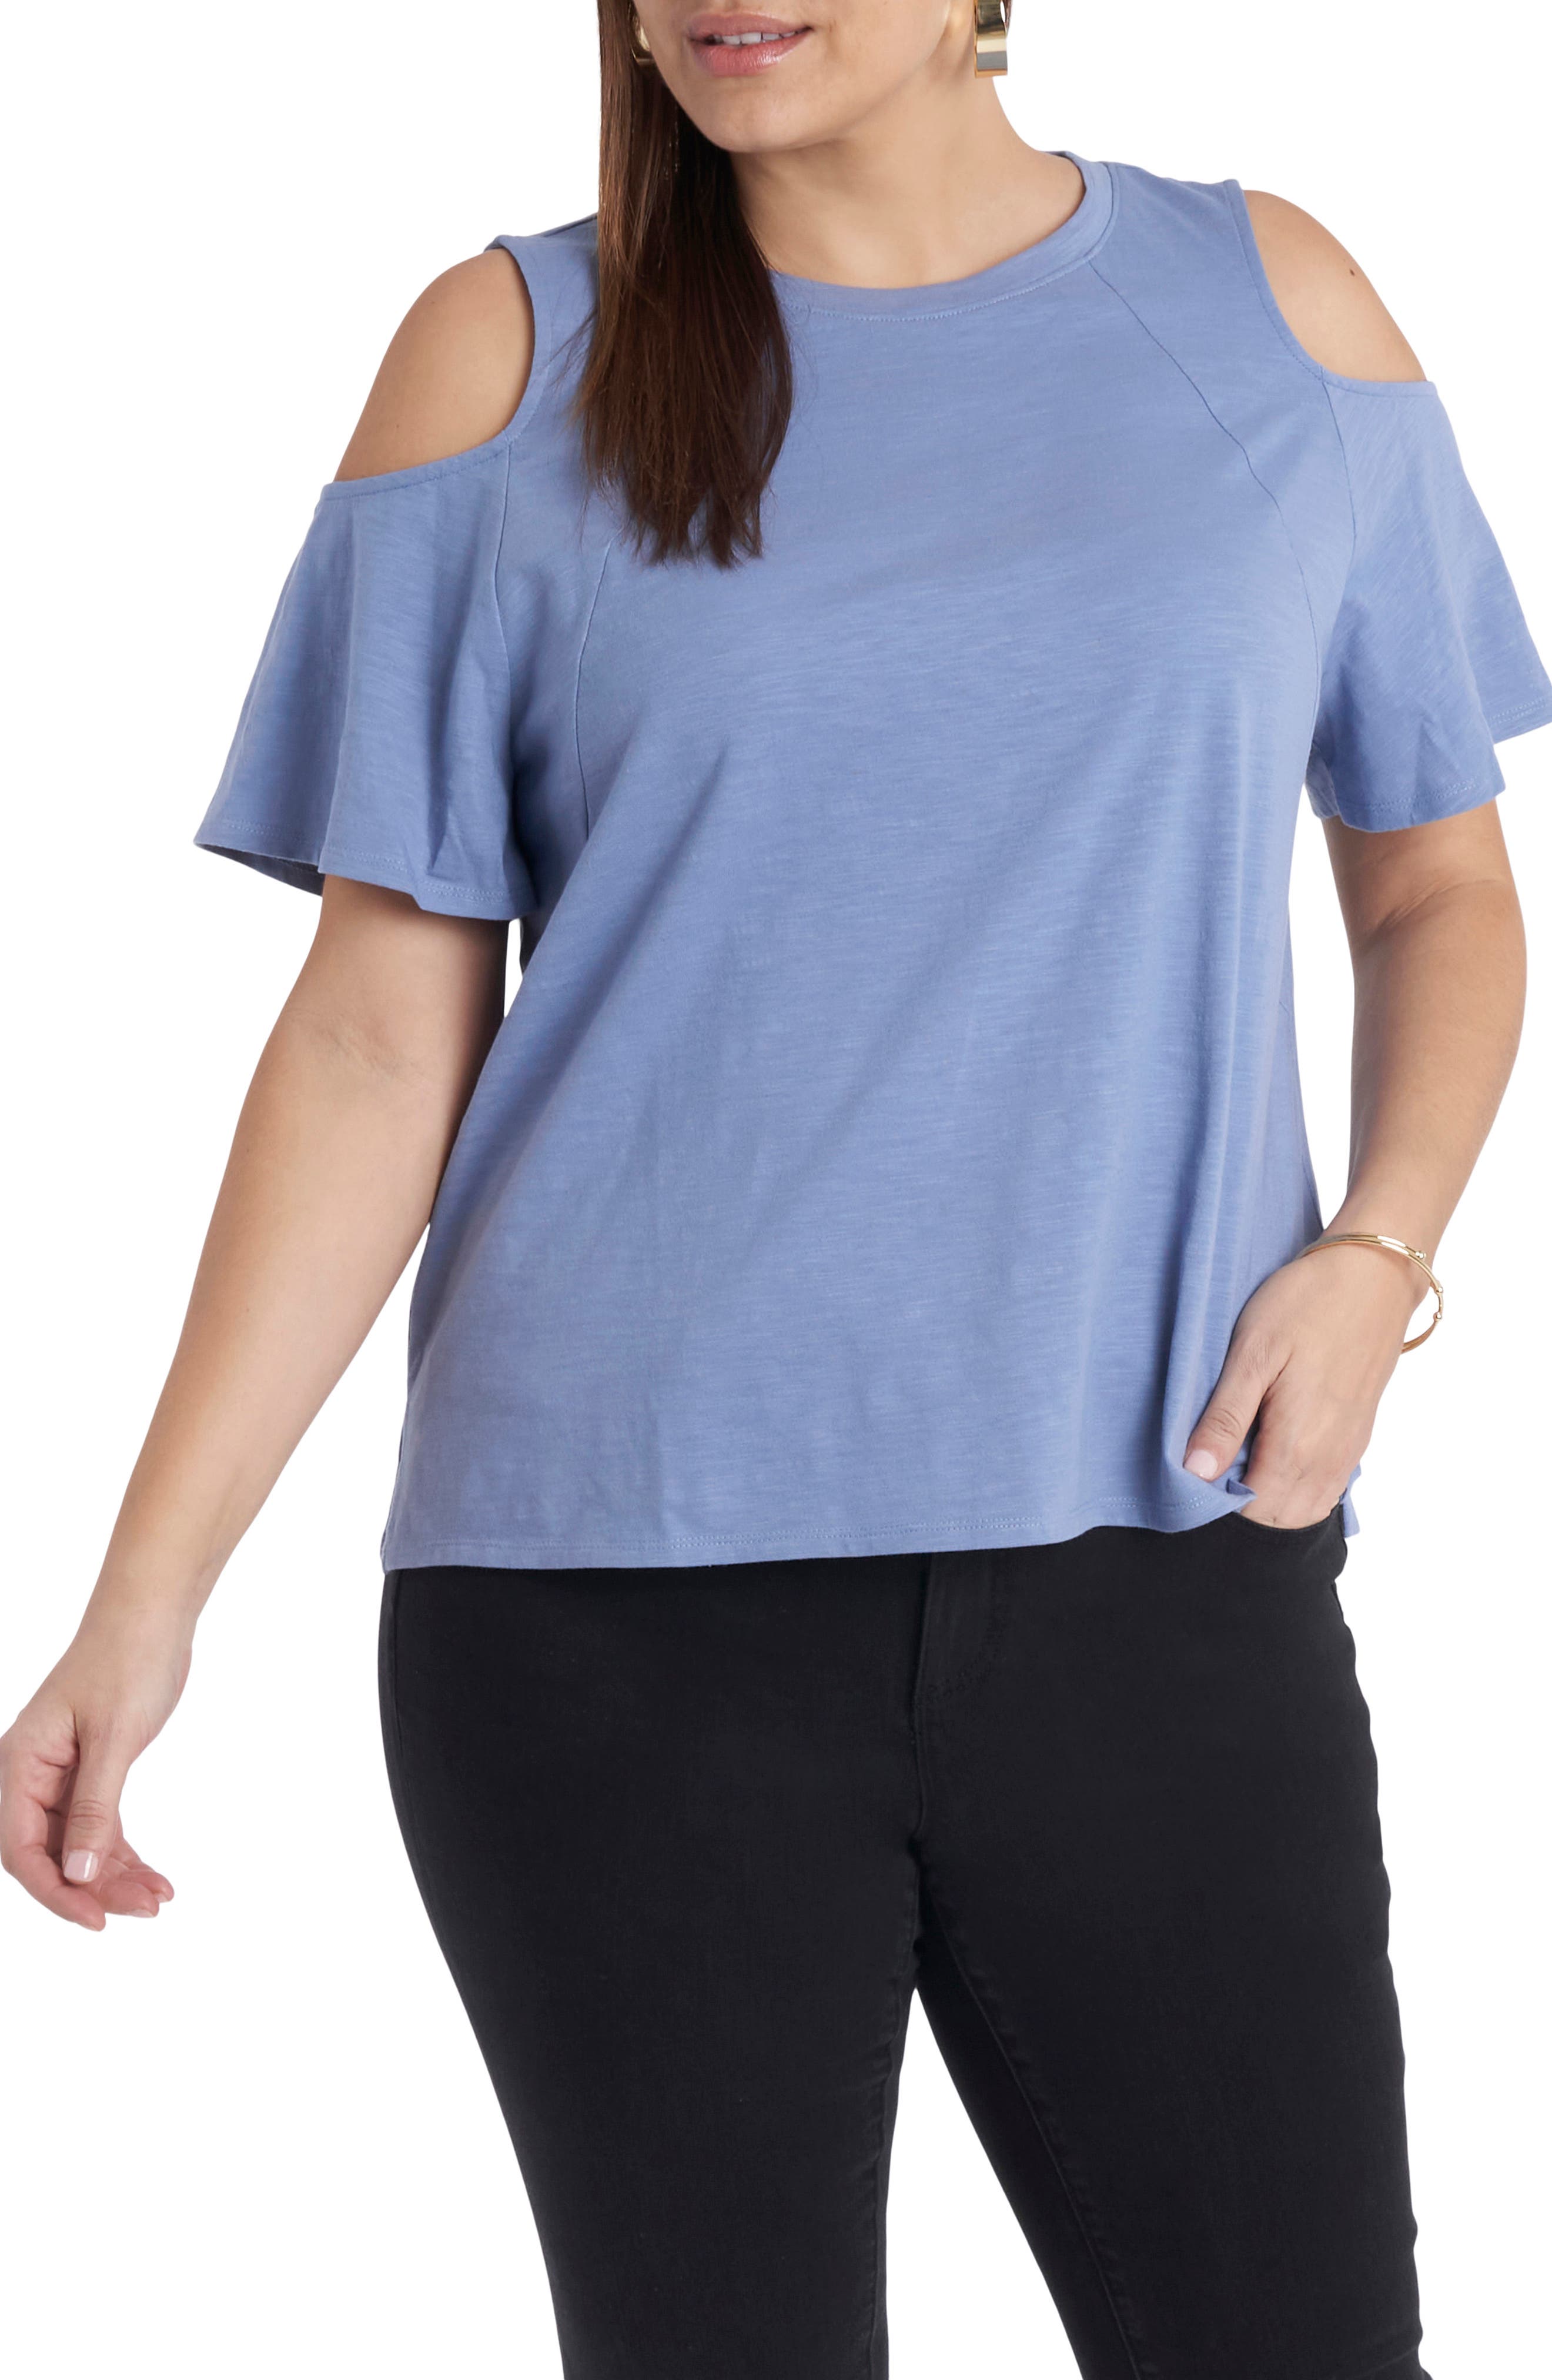 Cold-Shoulder Tops Are Back In Style for COVID-19 Vaccine